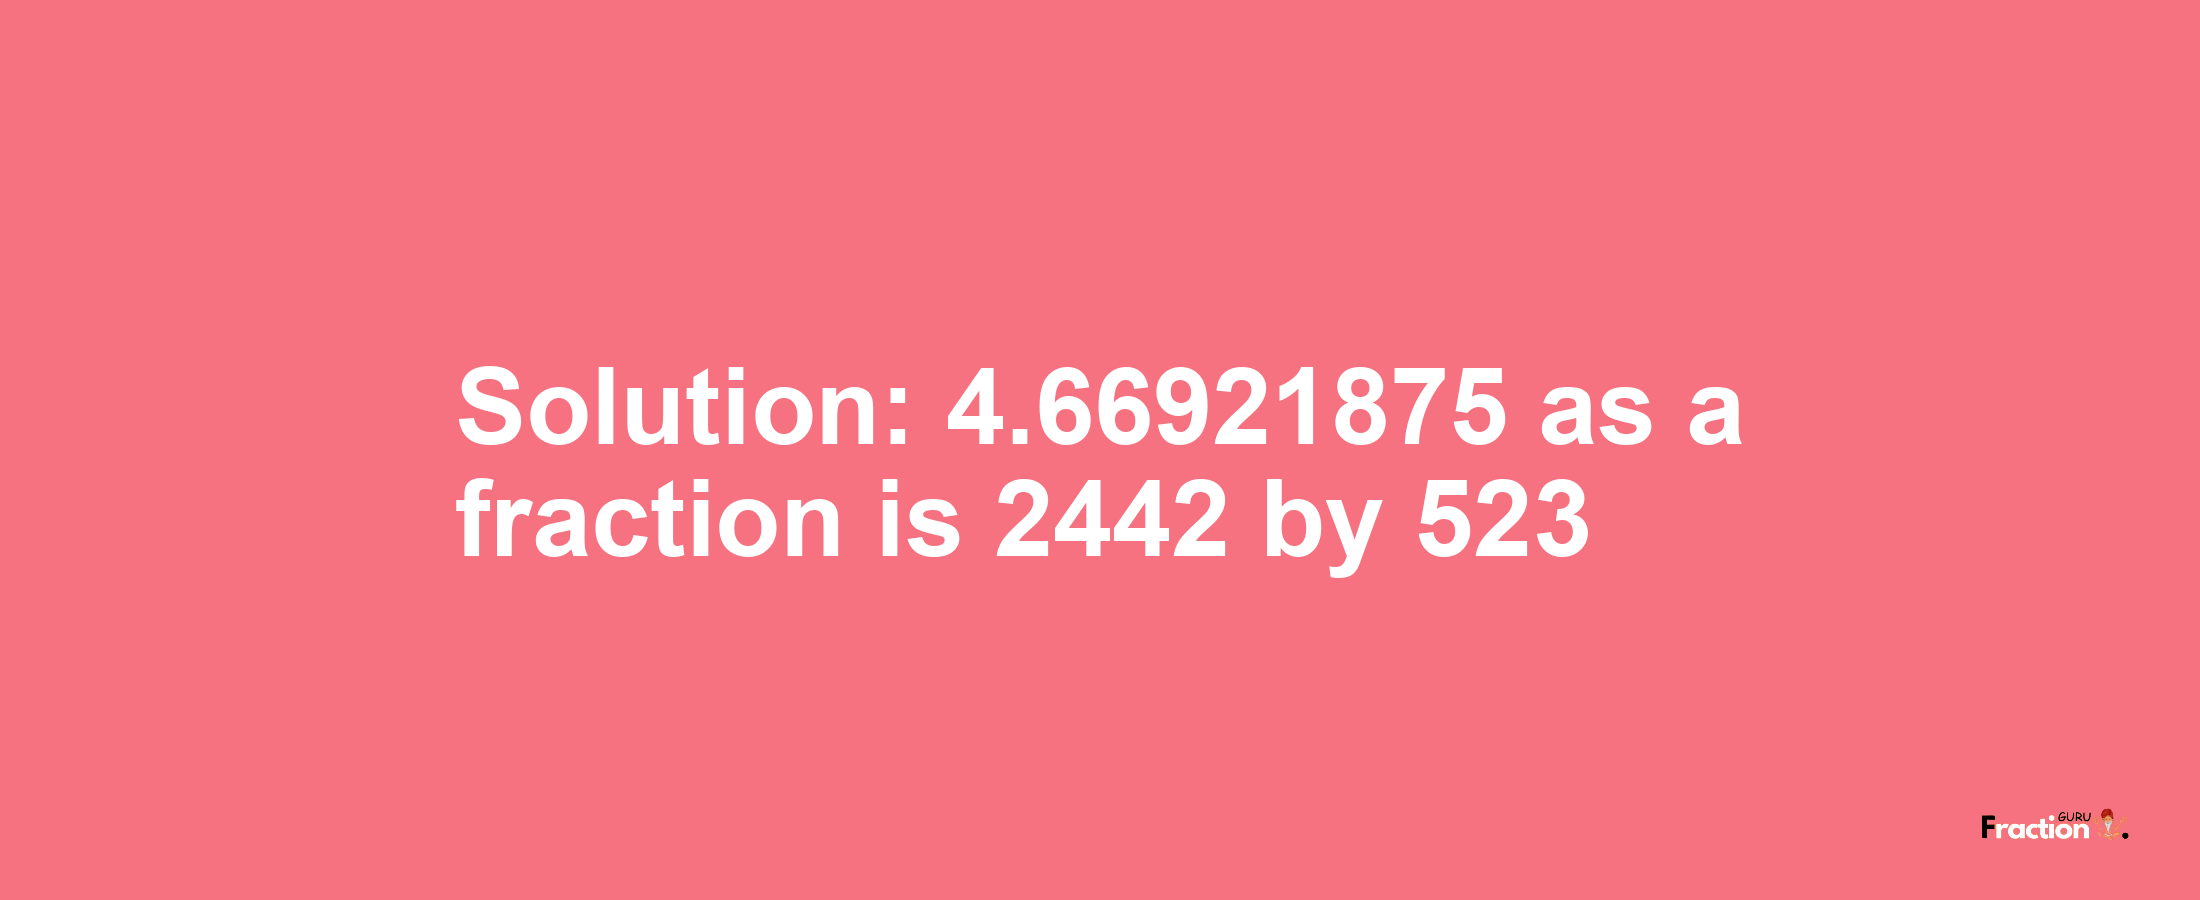 Solution:4.66921875 as a fraction is 2442/523